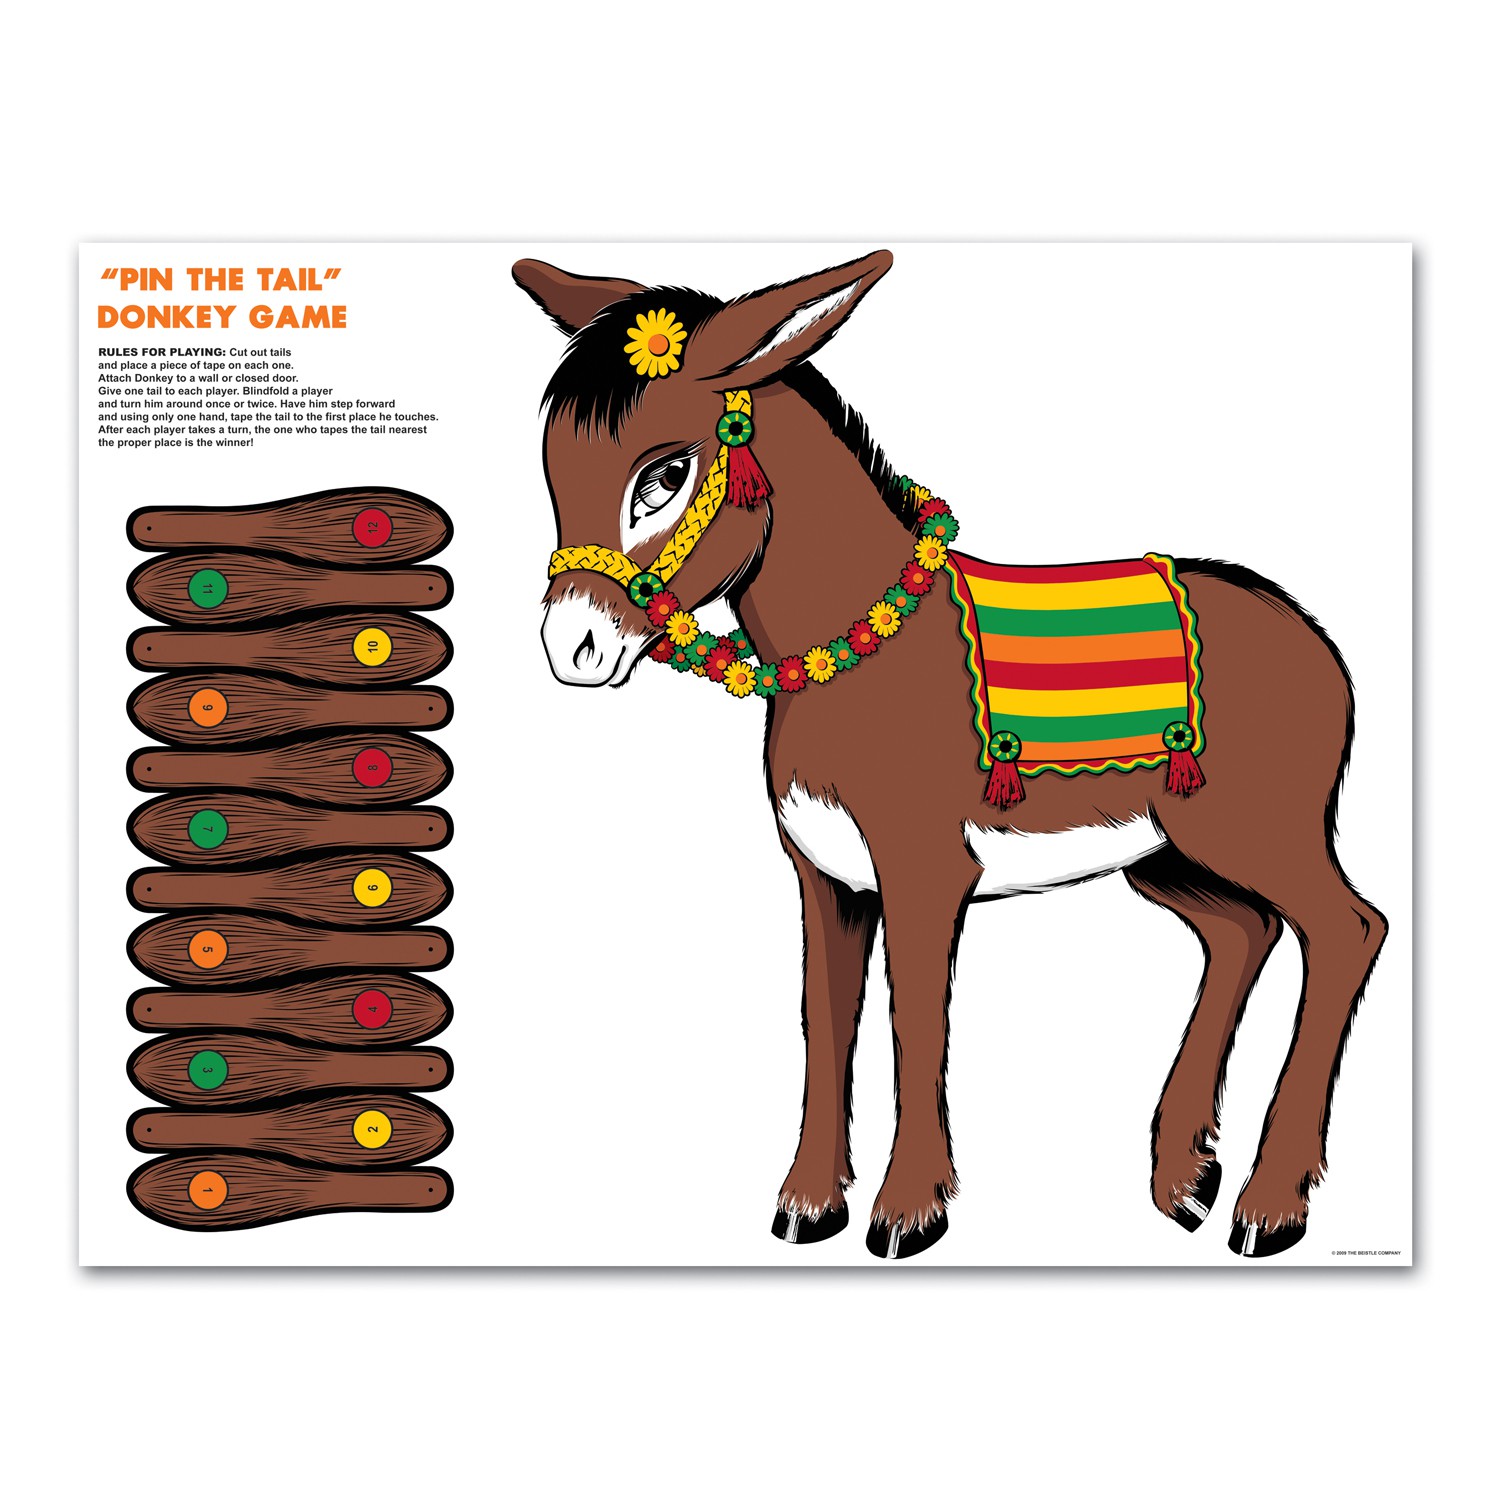 3 Best Images of Printable Pin Tail On Donkey Free Pin the Tail On